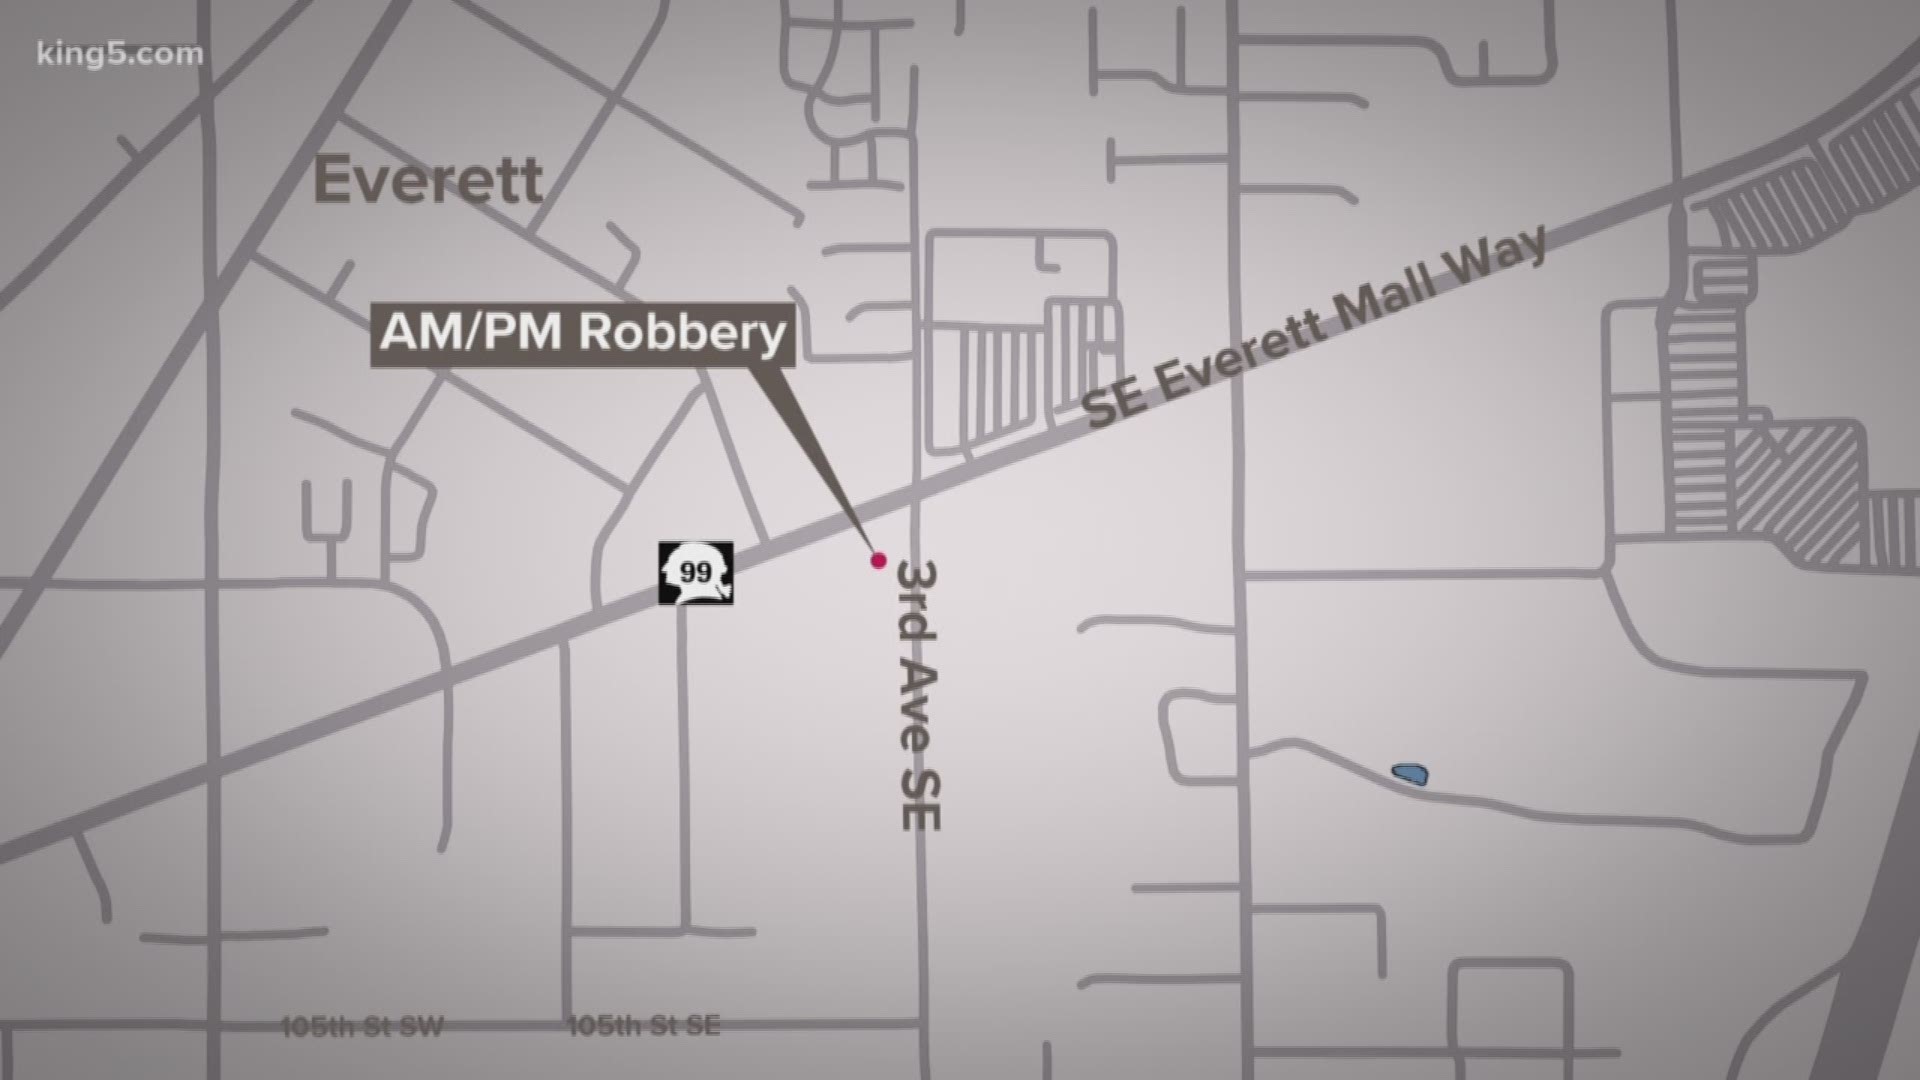 Police are searching for a suspect accused of robbing an Everett convenience store at gunpoint Monday morning.